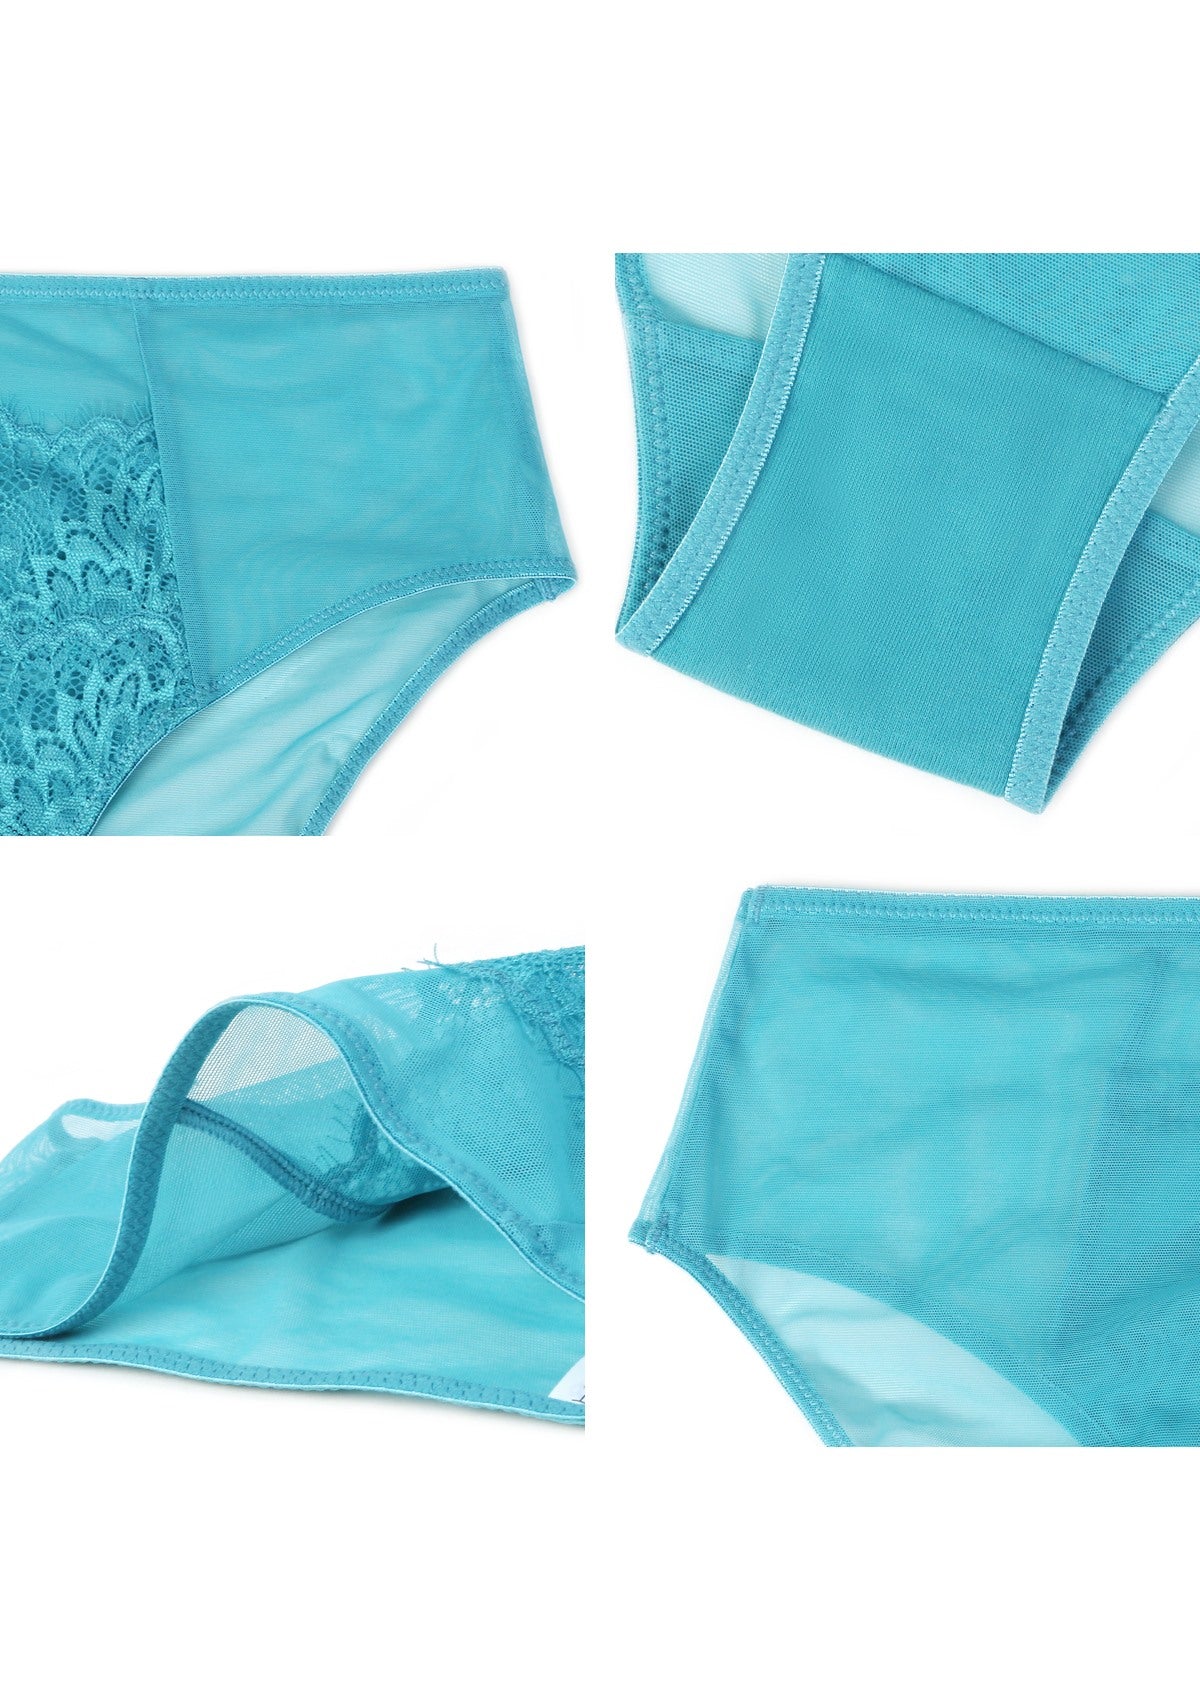 HSIA Spring Romance High-Rise Floral Lacy Panty-Comfort In Style - M / Horizon Blue